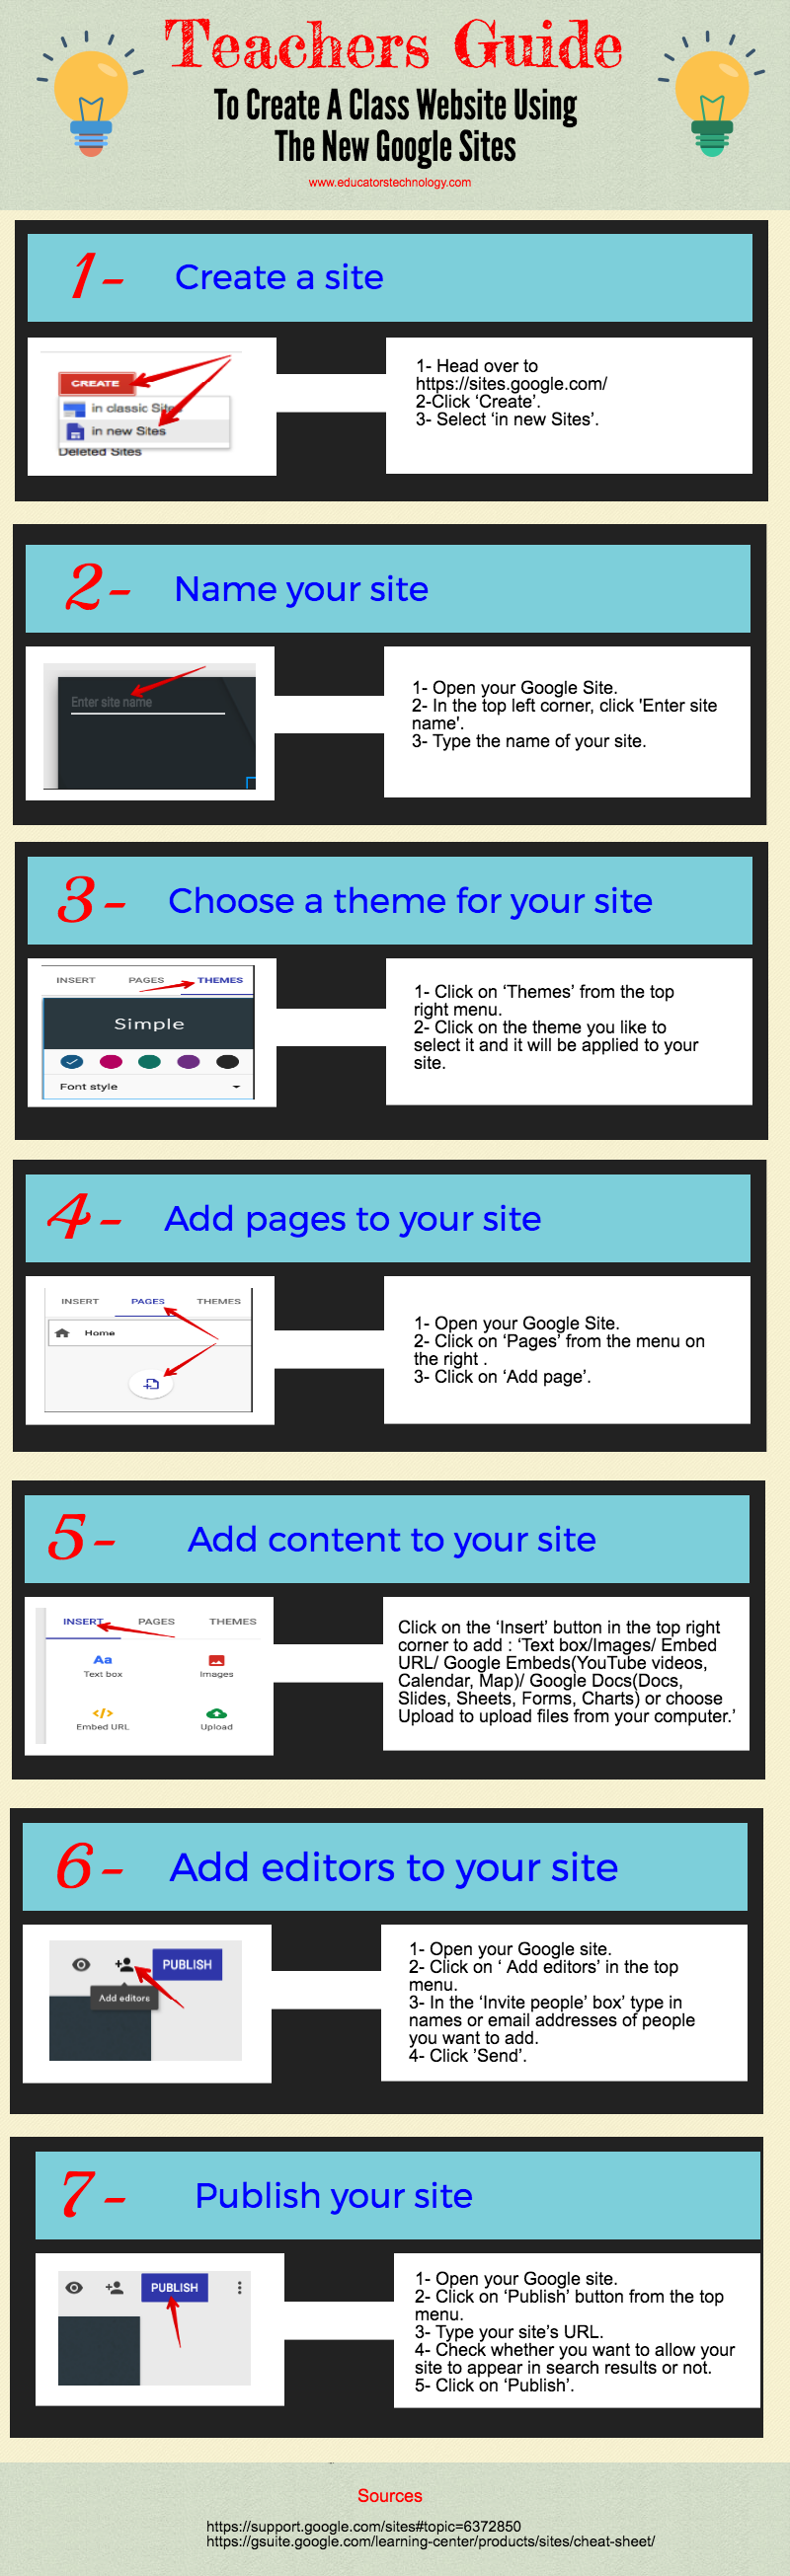 This Is How to Create A Website for Your Class Using Google Sites